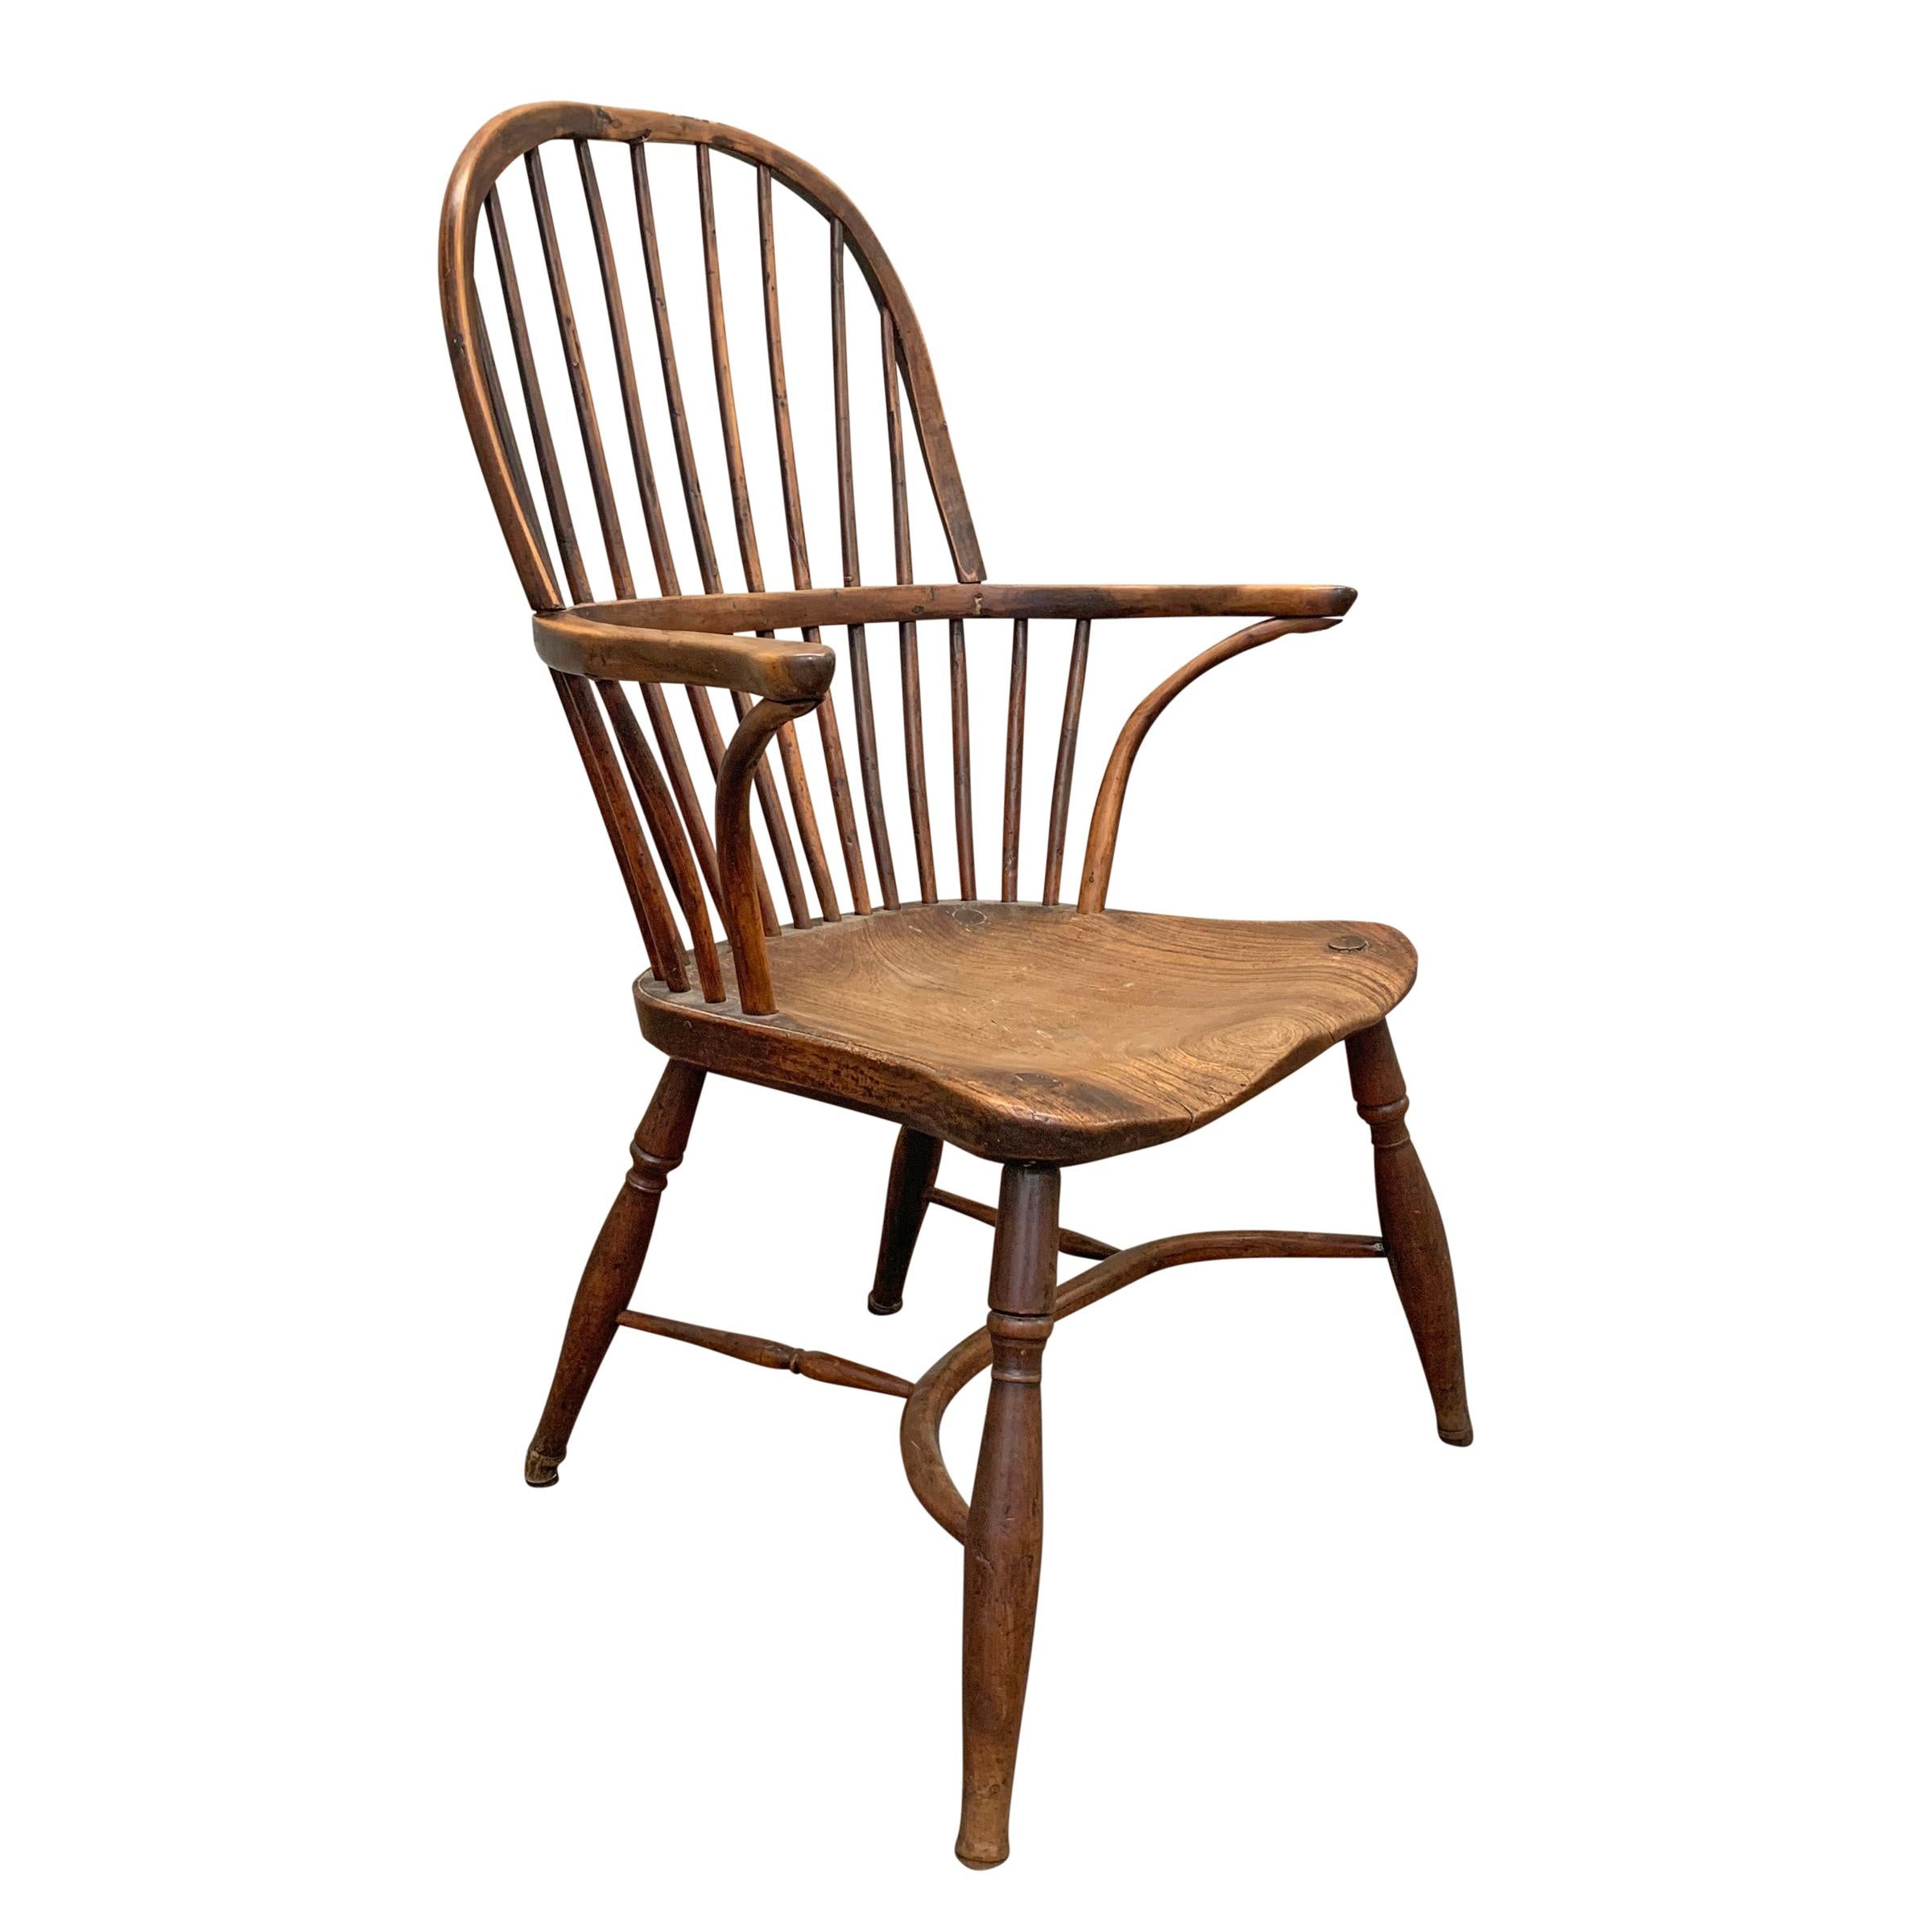 A wonderful late 18th century English elm and yew wood Windsor chair with a hoop back, out-turned arms supported by inverted stretchers, turned legs connected by a bentwood stretcher. The seat is one piece of wood with a beautiful patina.